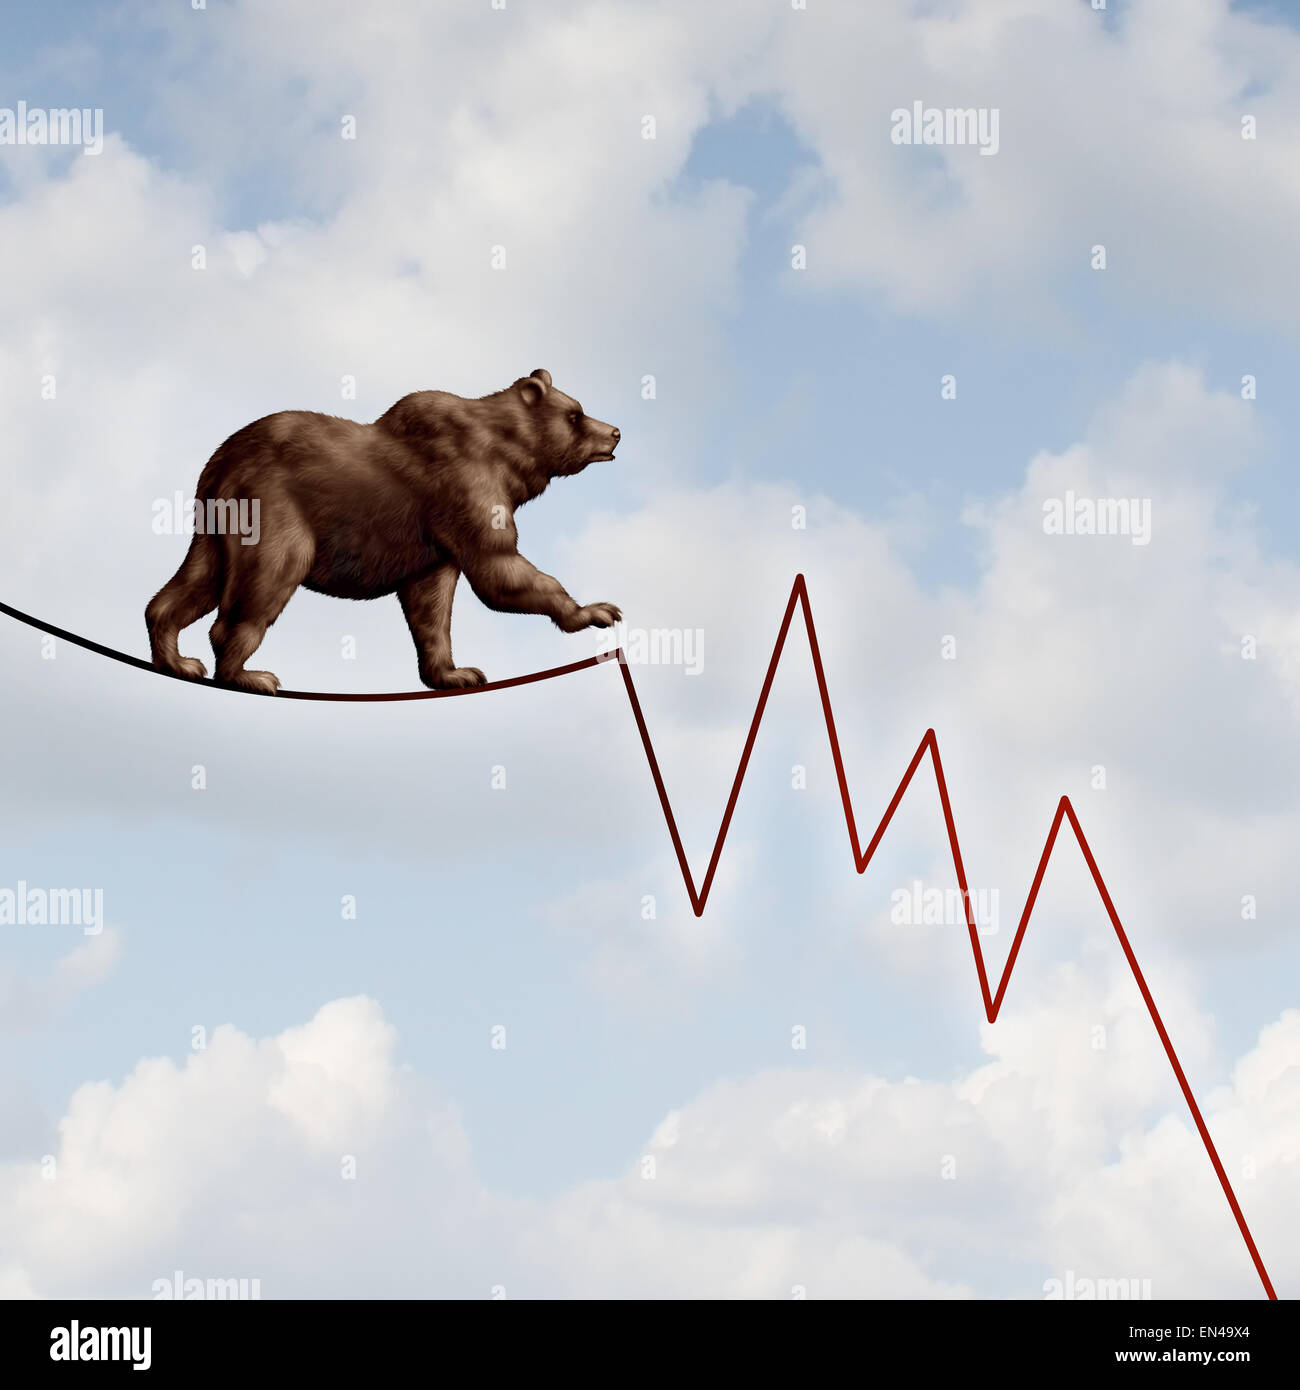 Bear market risk financial concept as a heavy bearish beast walking on a high tightrope shaped as a stock market loss diagram chart representing the investment danger ahead. Stock Photo